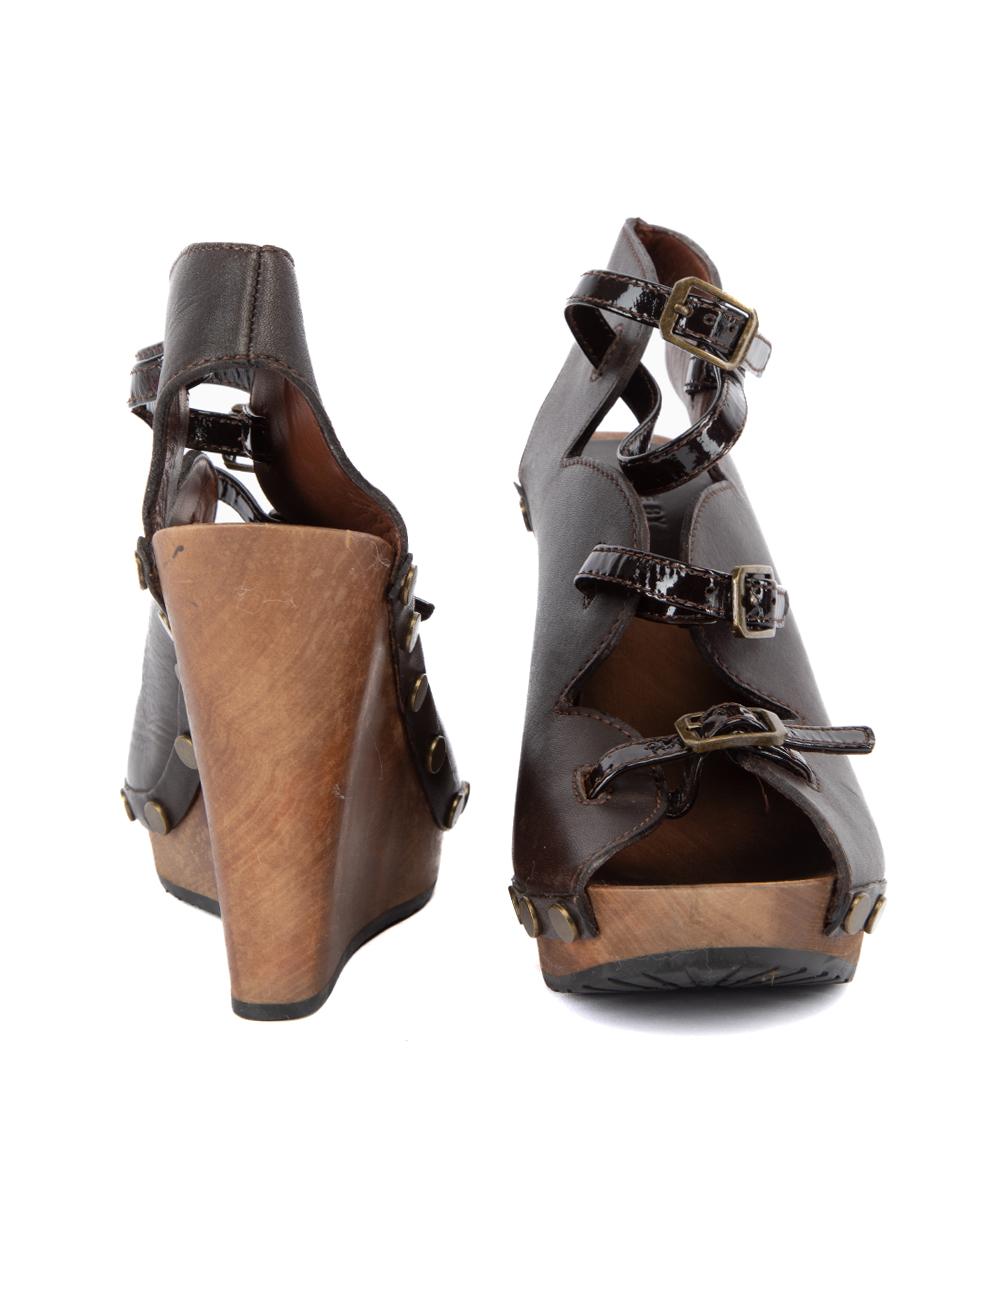 CONDITION is Very Good. Minimal wear to wedges is evident, minimal scratches and indents can be seen on the wooden heel of this used See by Chloé designer resale item. This item comes with original dustabg. Details Brown Leather Heeled wedges Peep